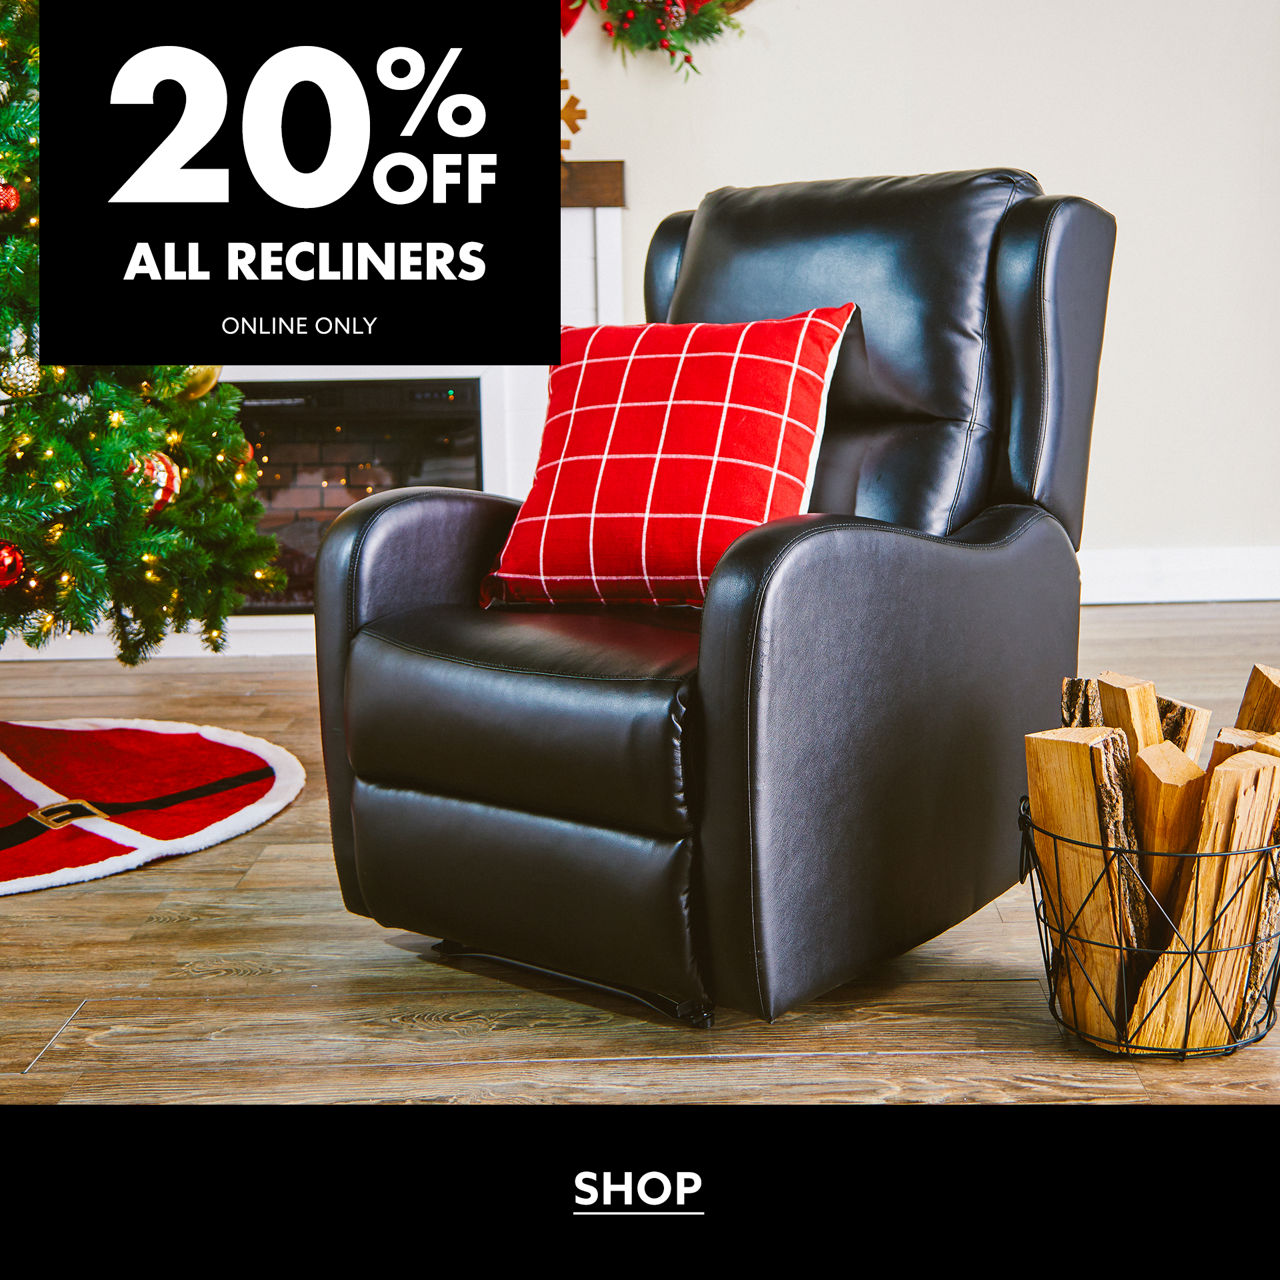 20% Off - All Recliners - Online Only